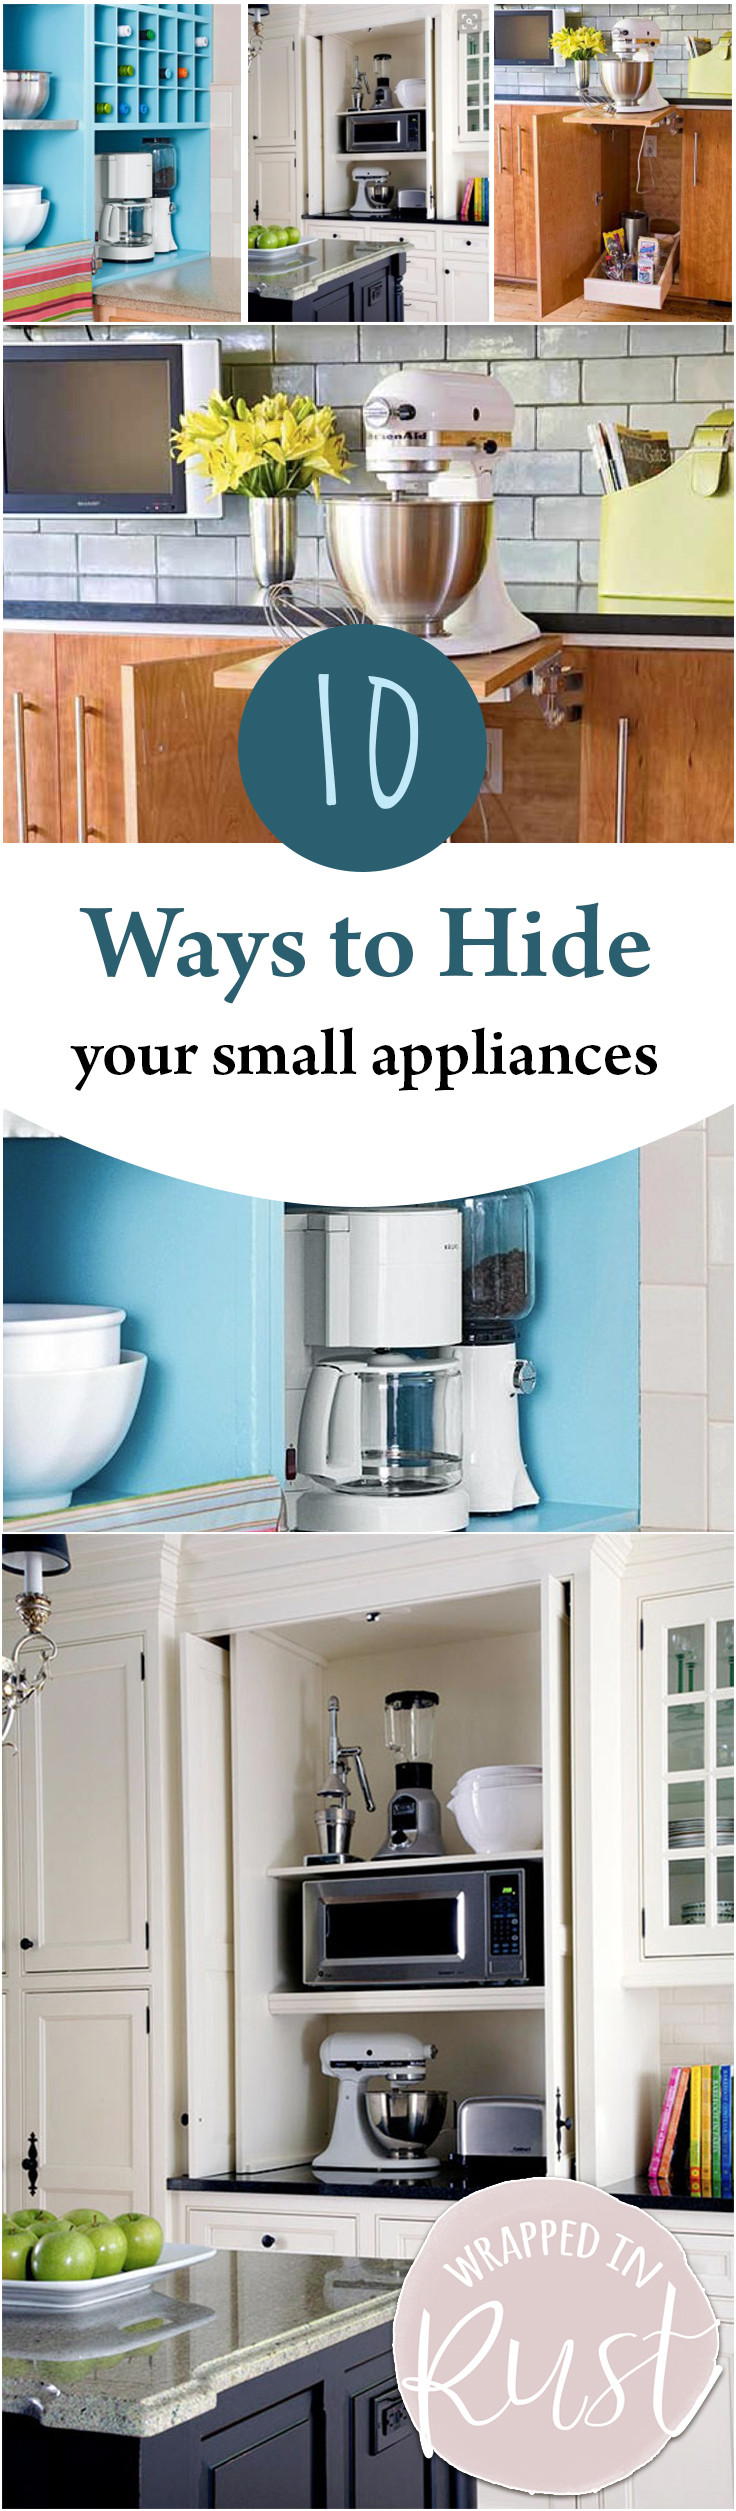 Kitchen Appliance Storage
 10 Ways to Hide Your Small Appliances Wrapped in Rust